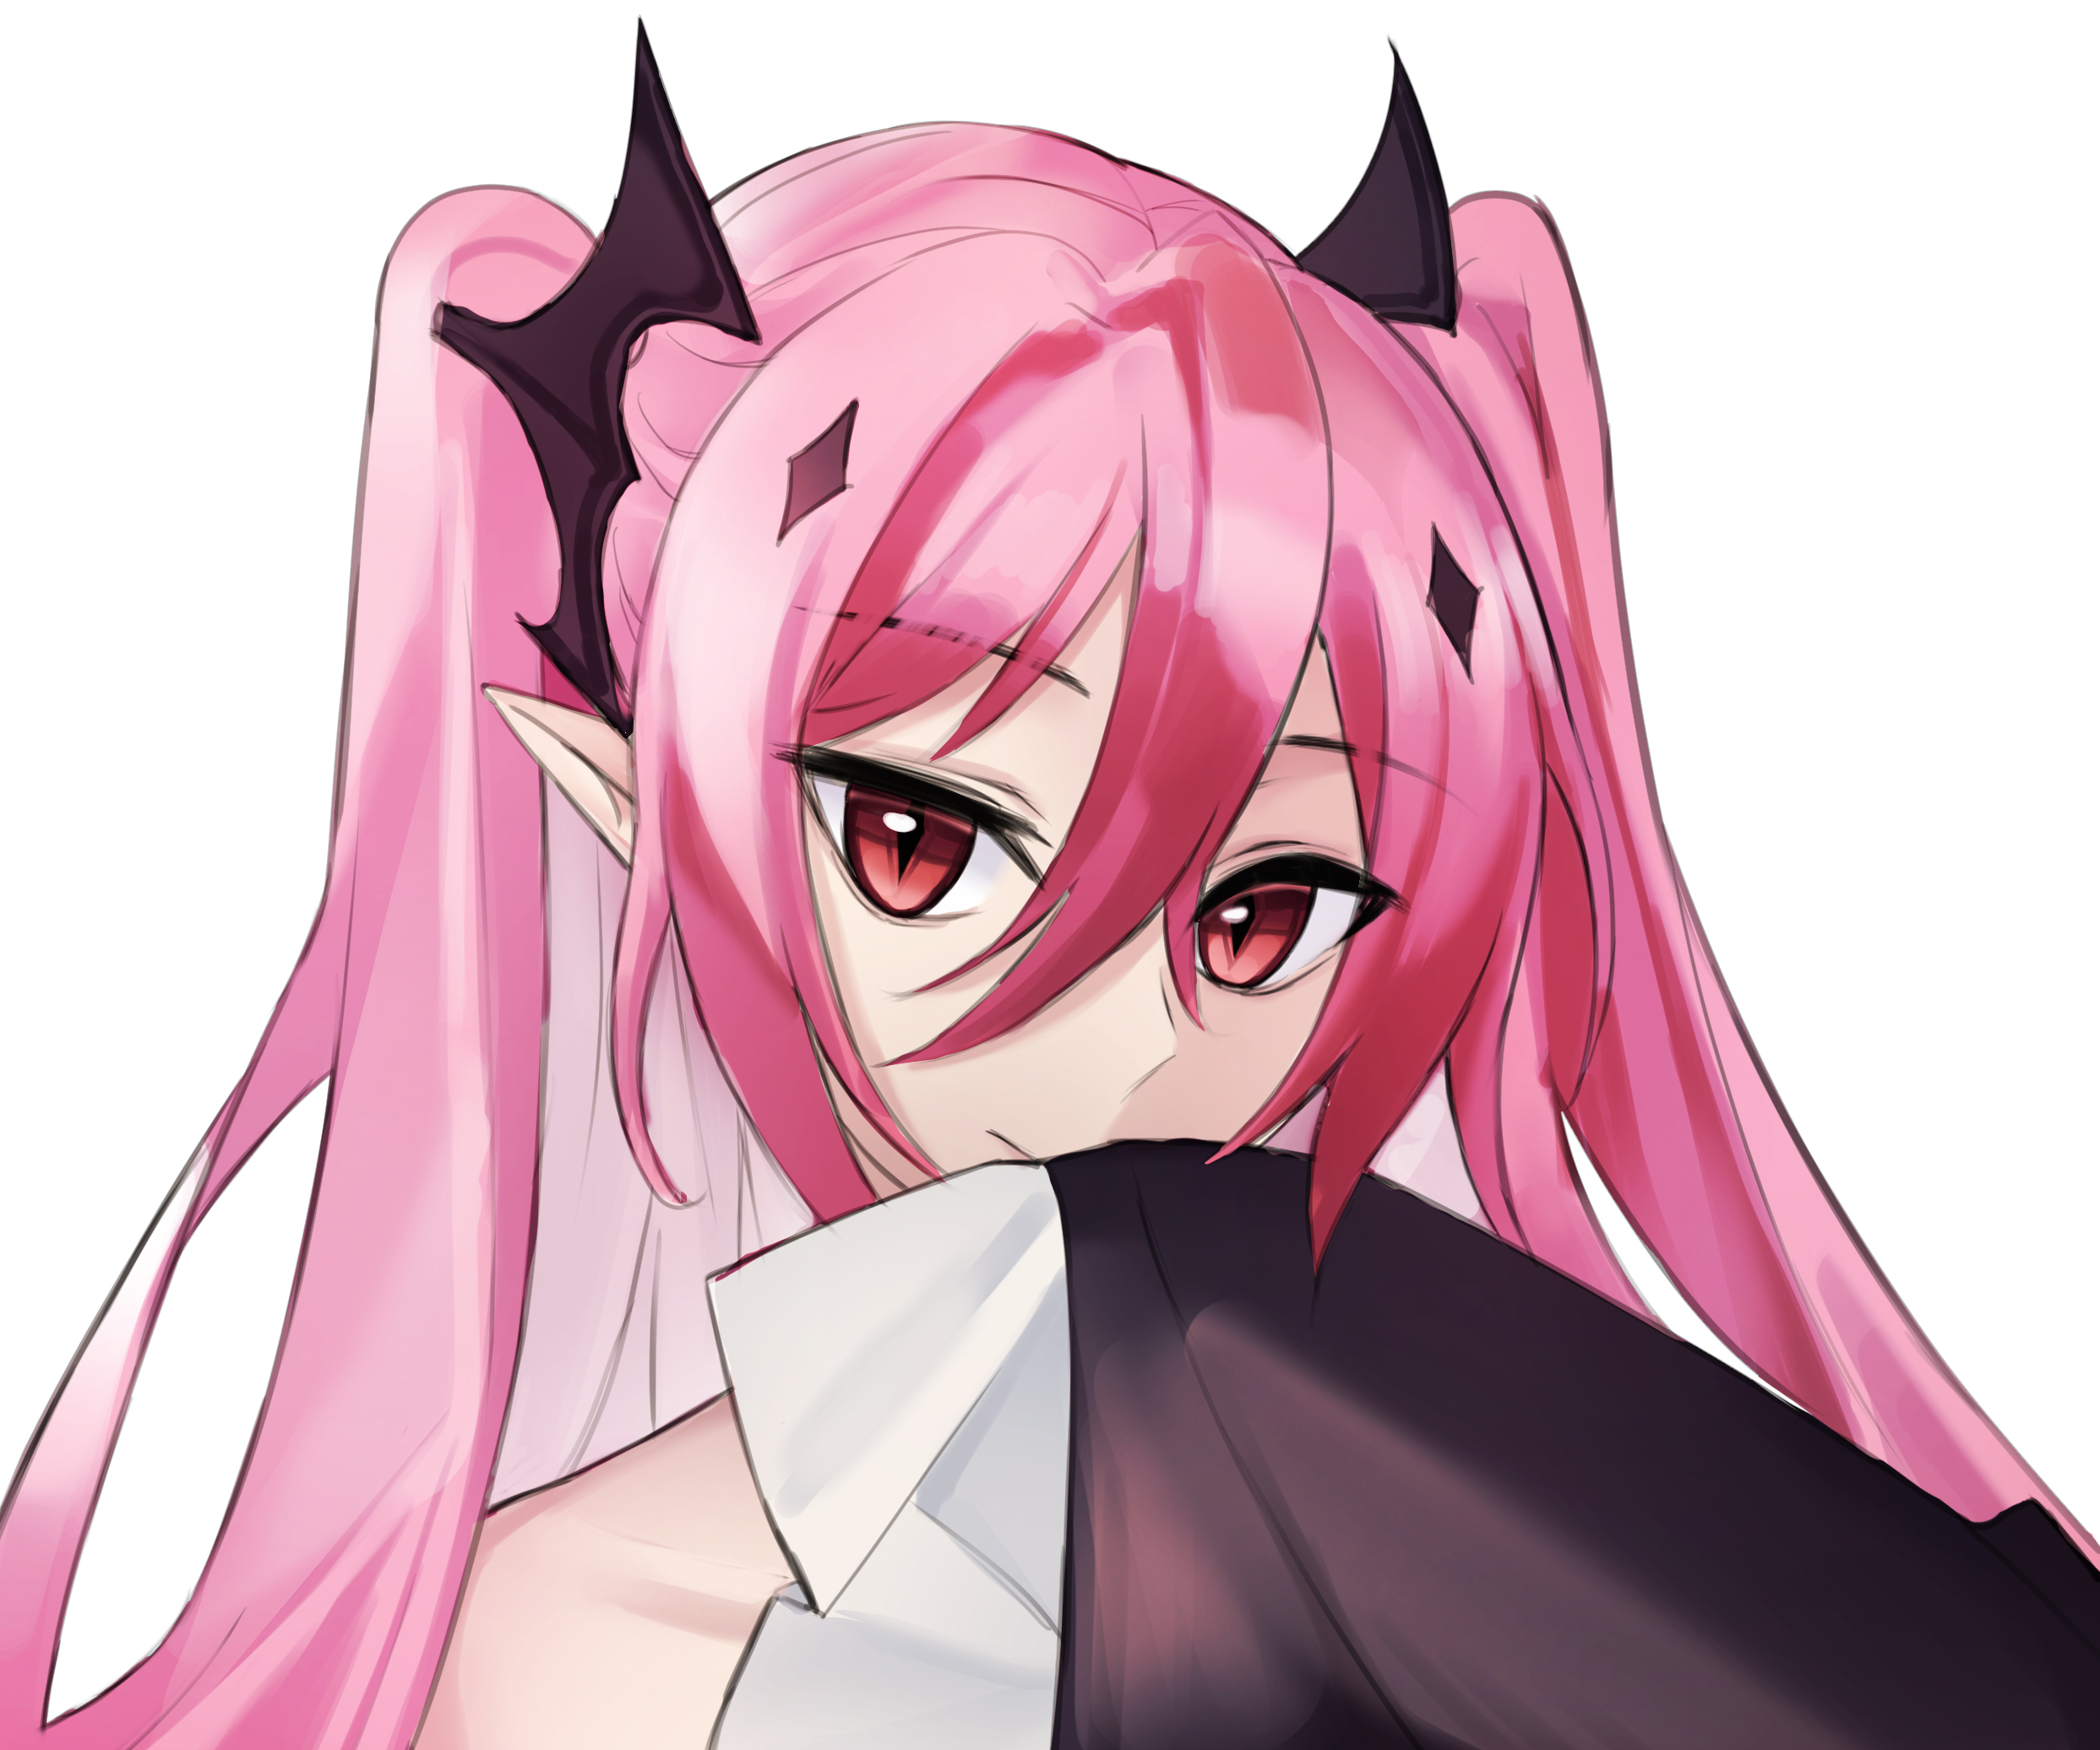 Krul Tepes by liveloveburndie on DeviantArt | Cute anime character, Anime,  Anime characters